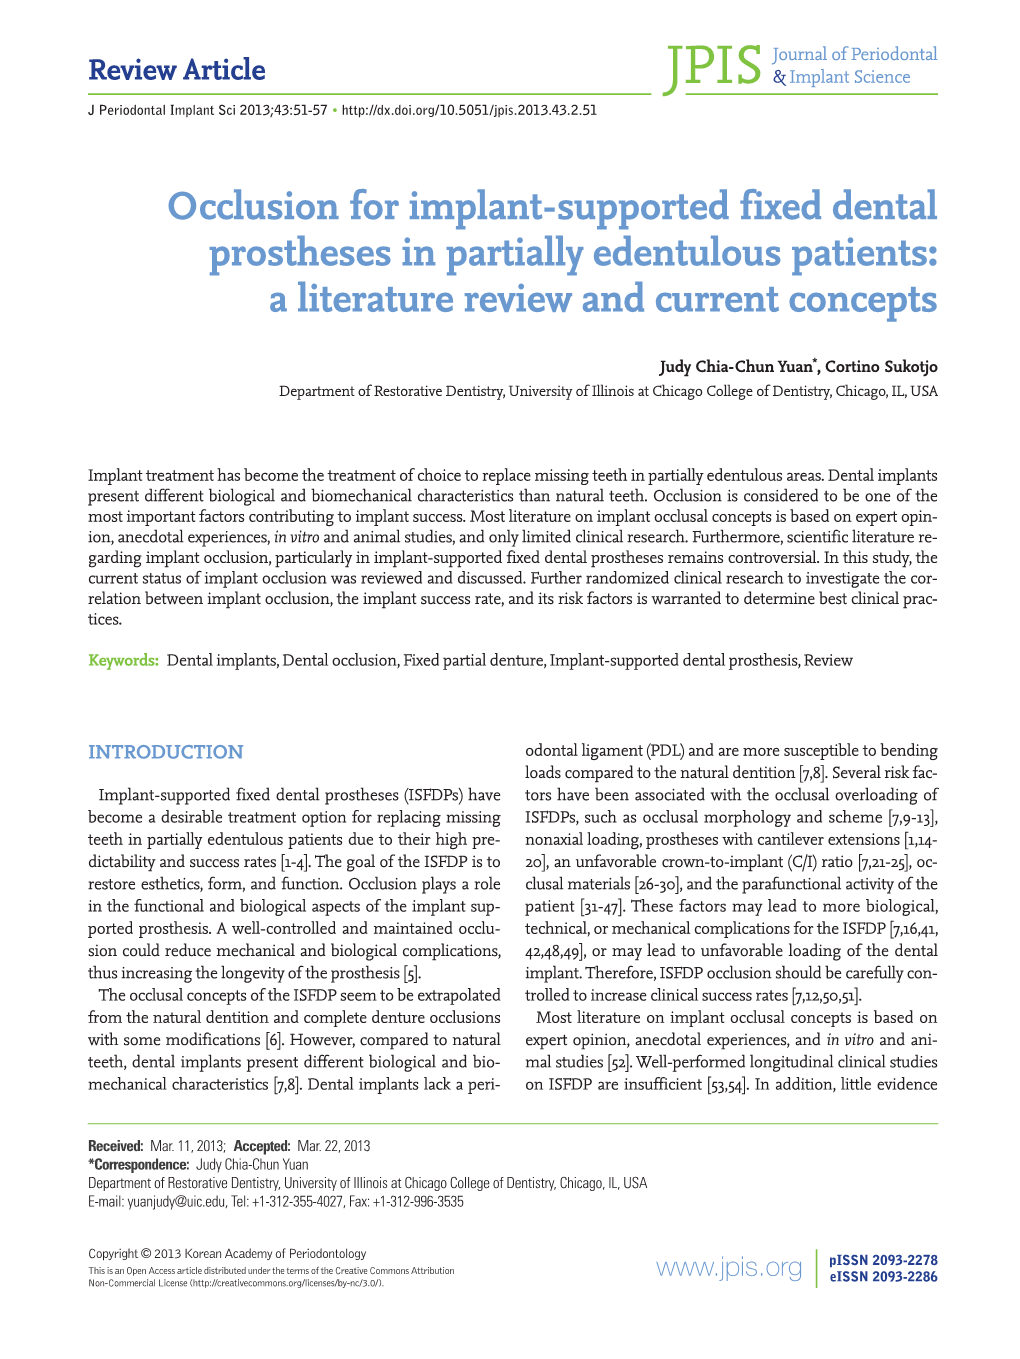 Occlusion for Implant-Supported Fixed Dental Prostheses in Partially Edentulous Patients: a Literature Review and Current Concepts